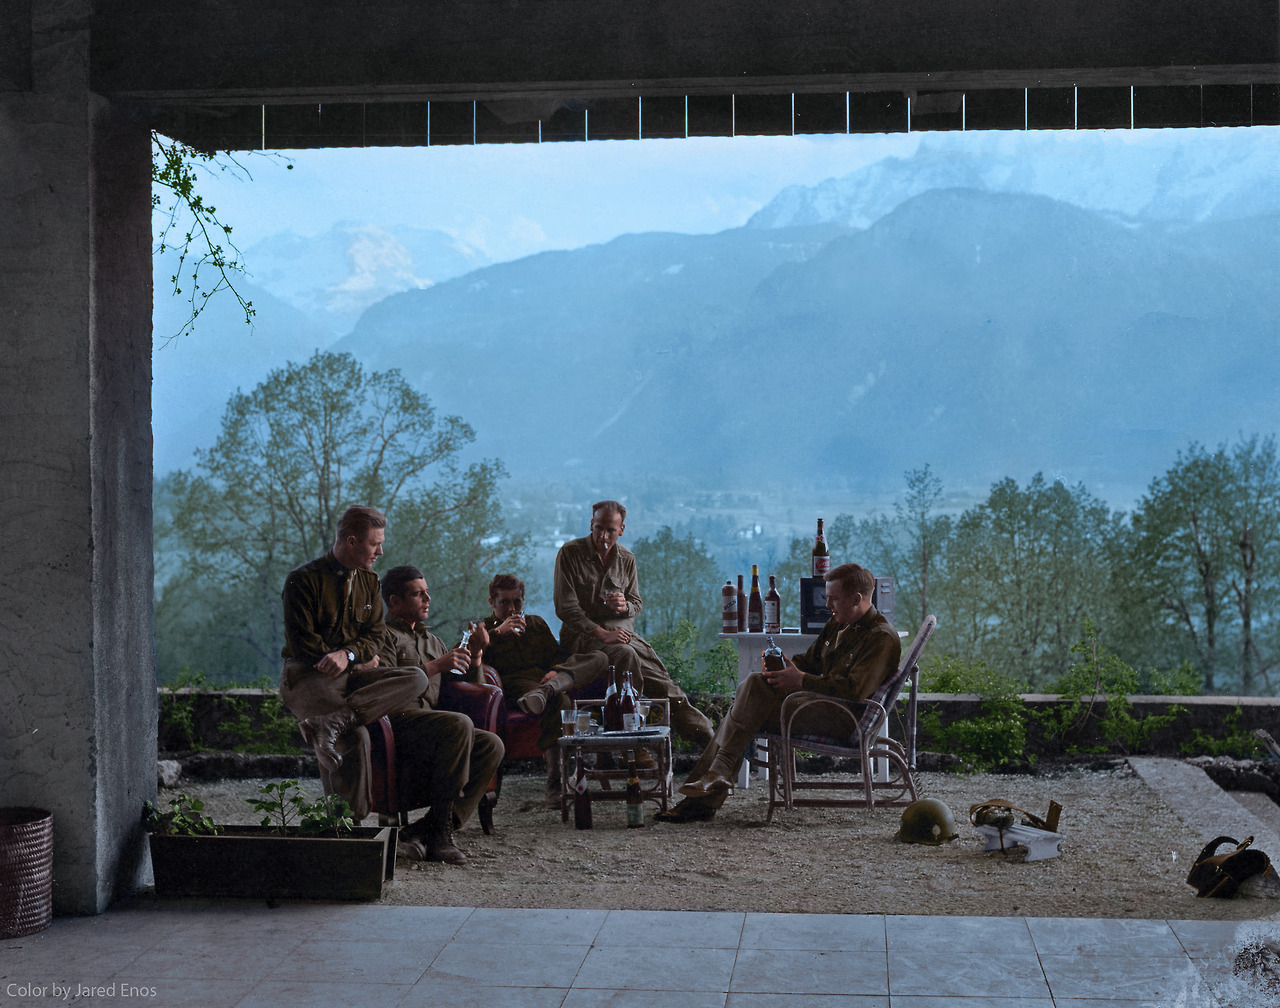   Major Richard Winters, Captain Lewis Nixon, and other officers of Easy Company